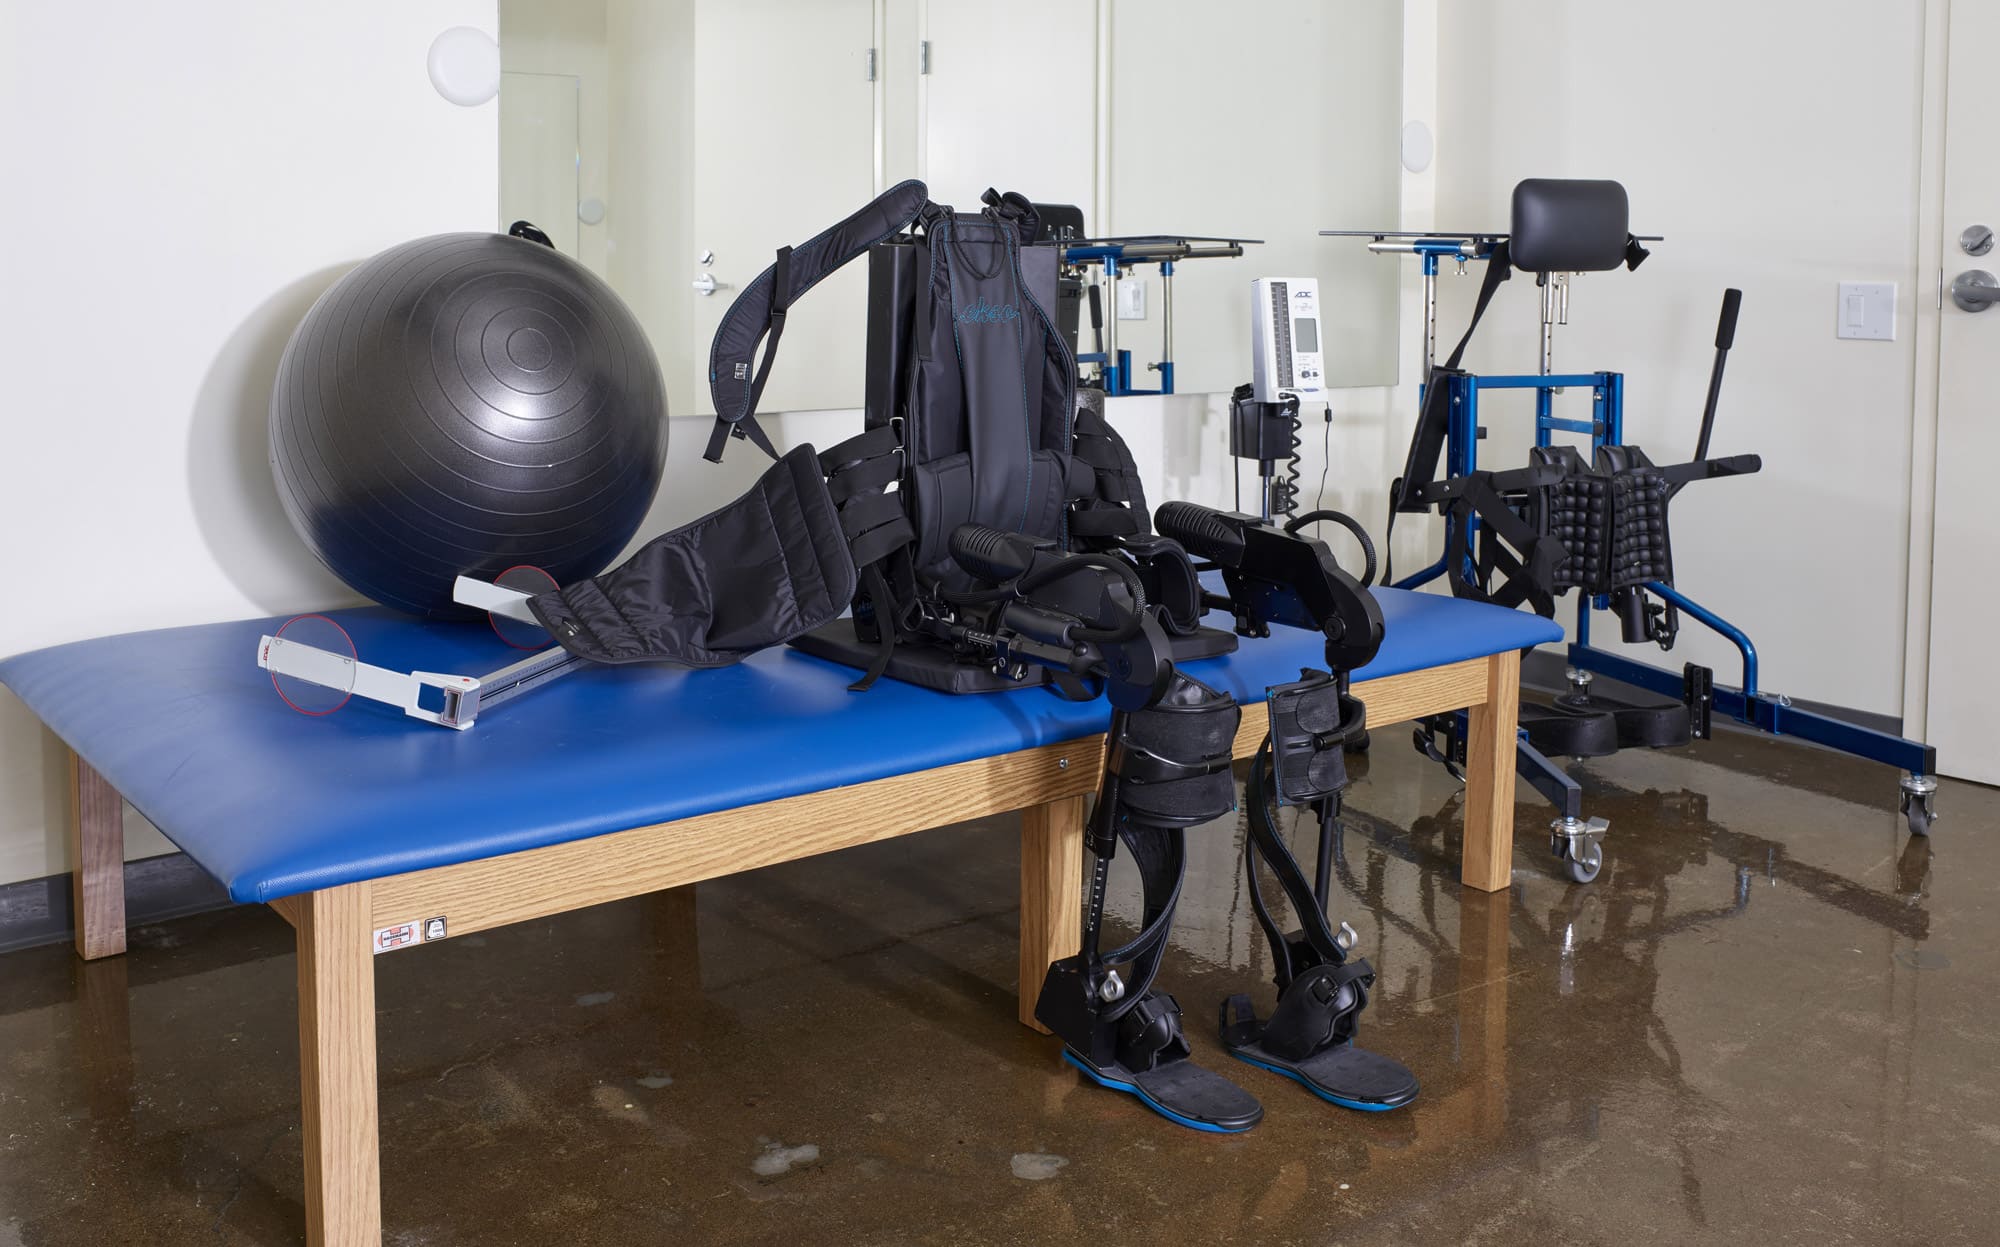 Medical Robot “Suits” that are Changing the World